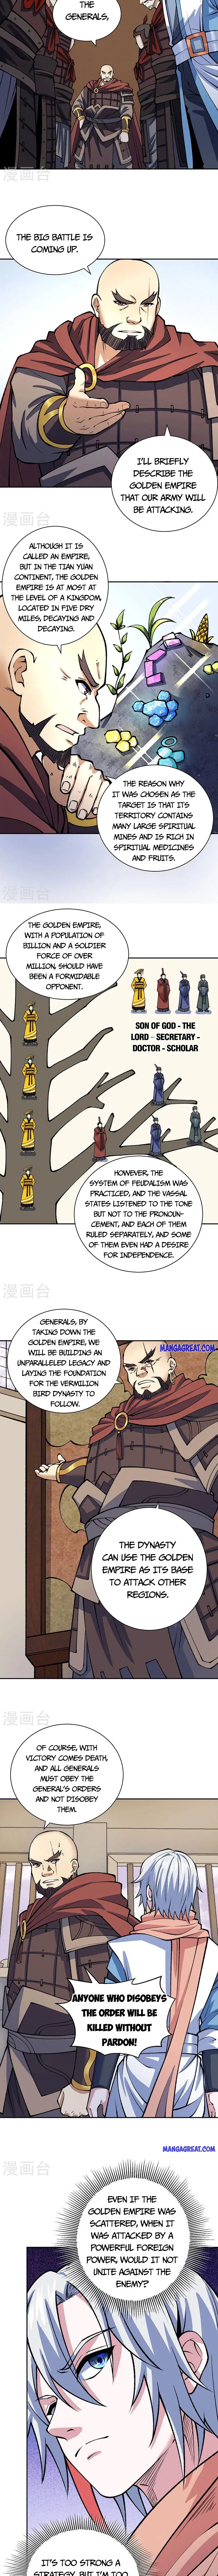 Martial Arts Reigns Chapter 480 page 3